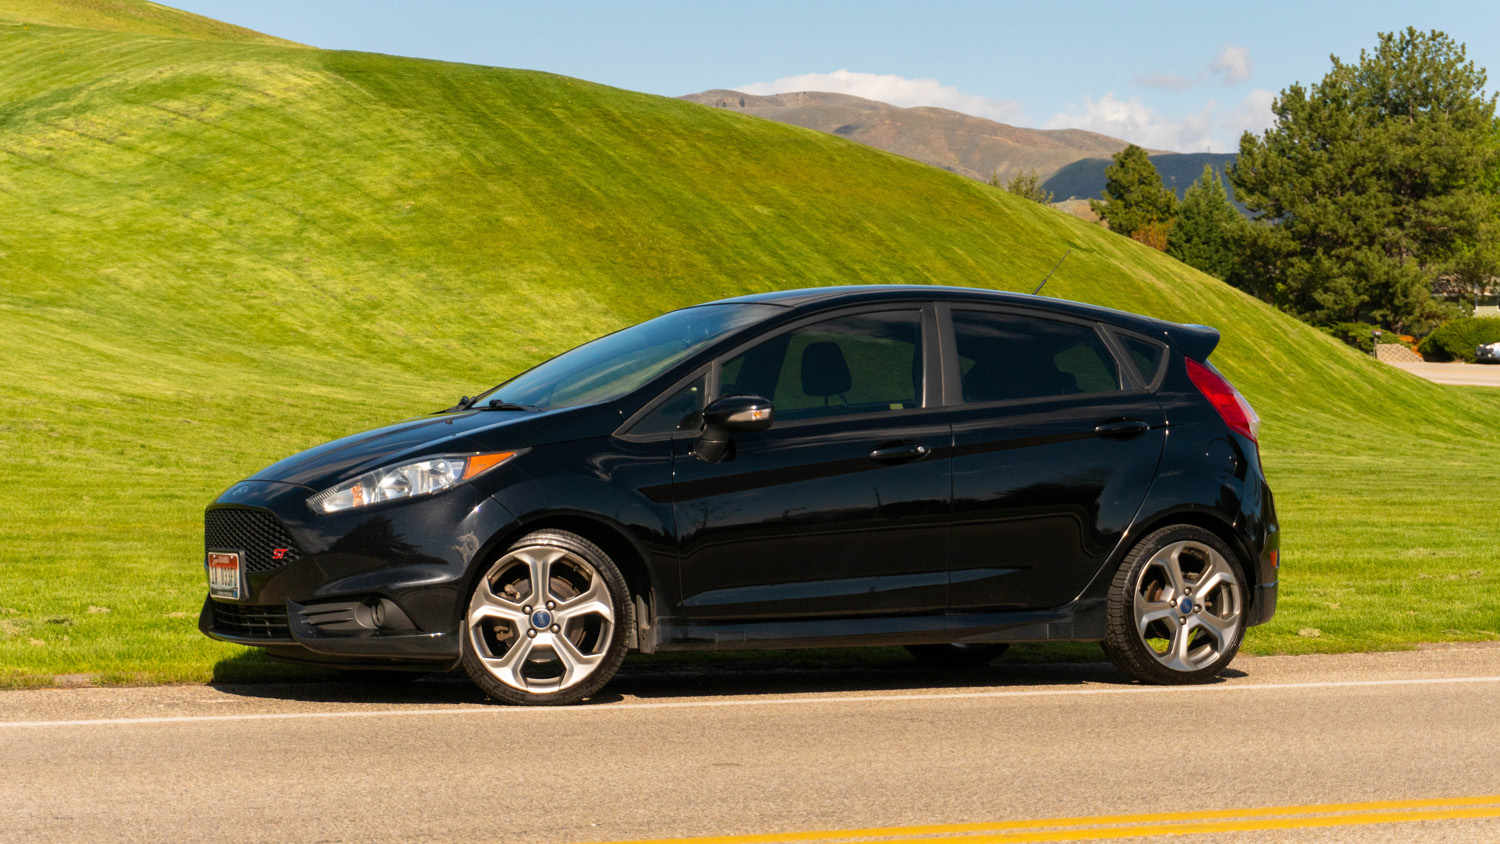 Shadow Black 2016 Ford Fiesta ST parked in front of grassy hill in Boise, Idaho foothills